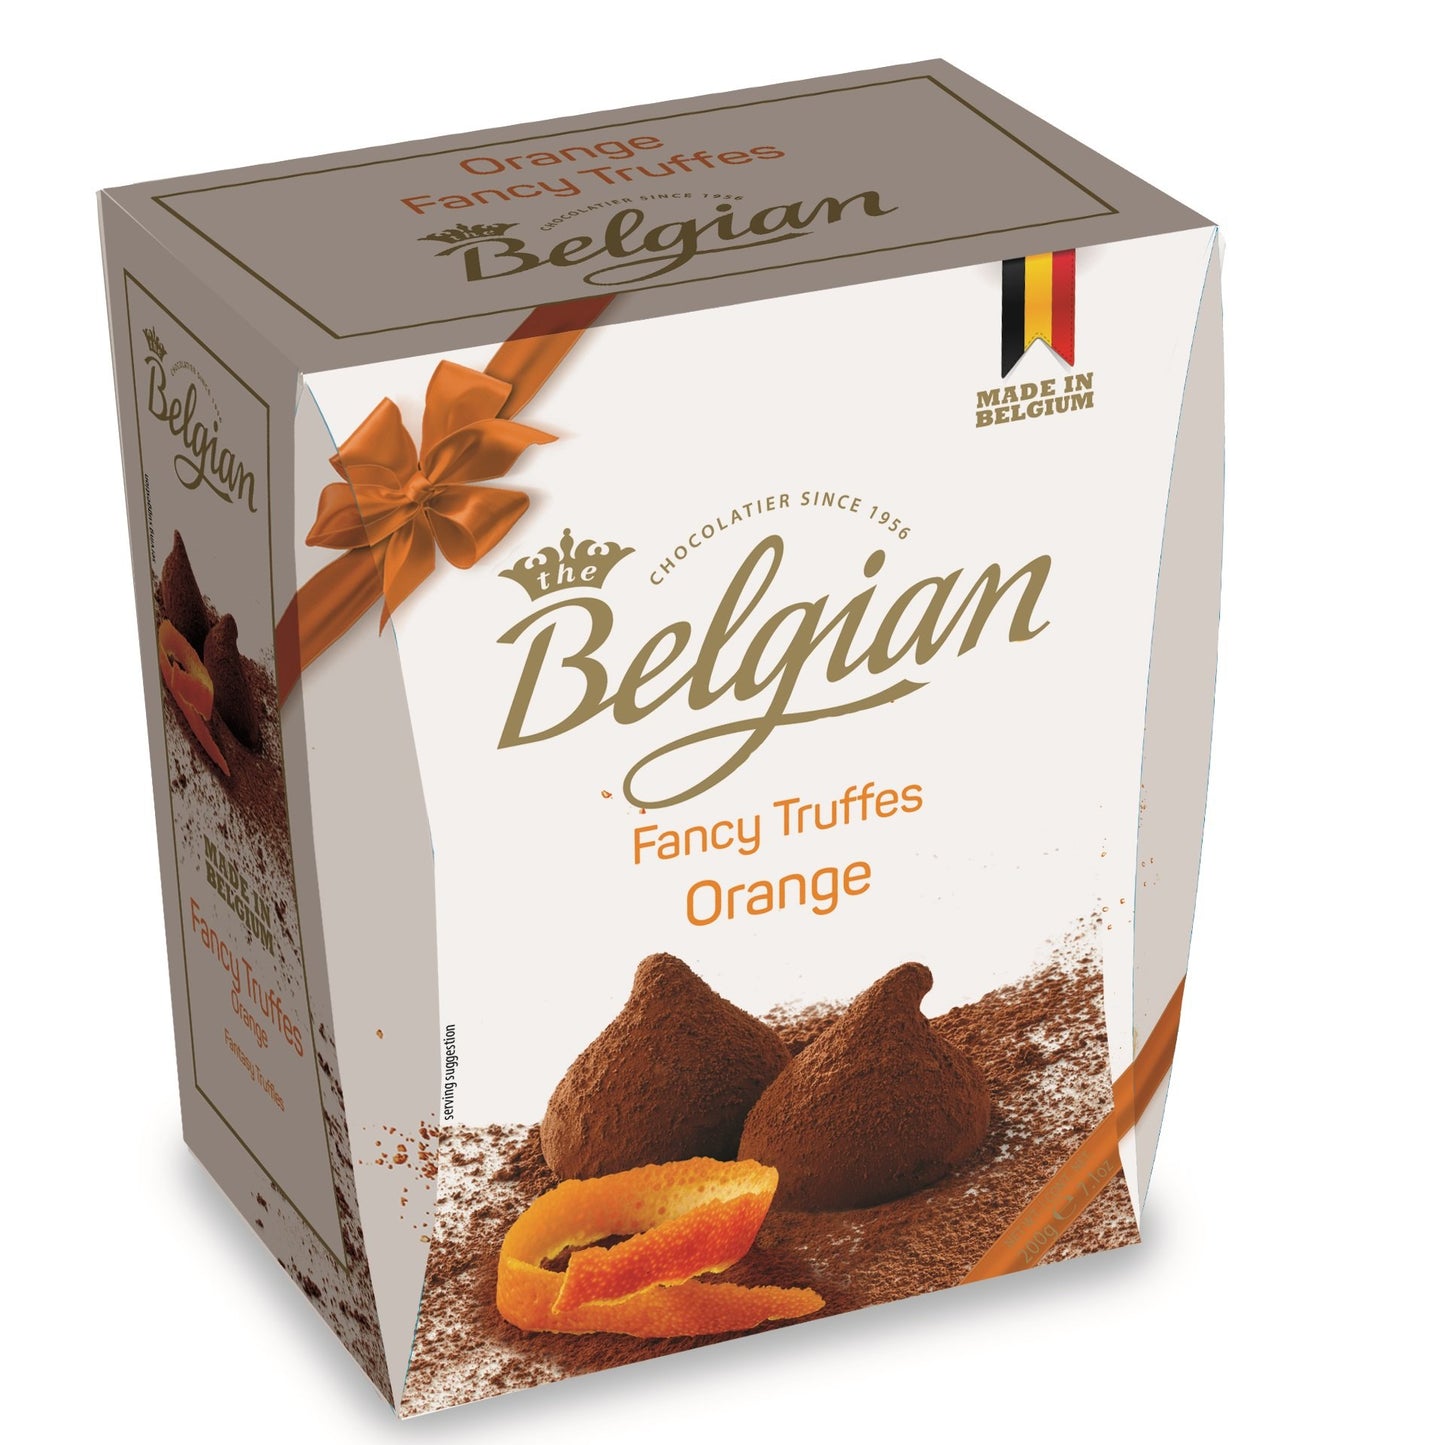 [The Belgian][Truffles][Cocoa Dusted Truffles with Orange Pieces]